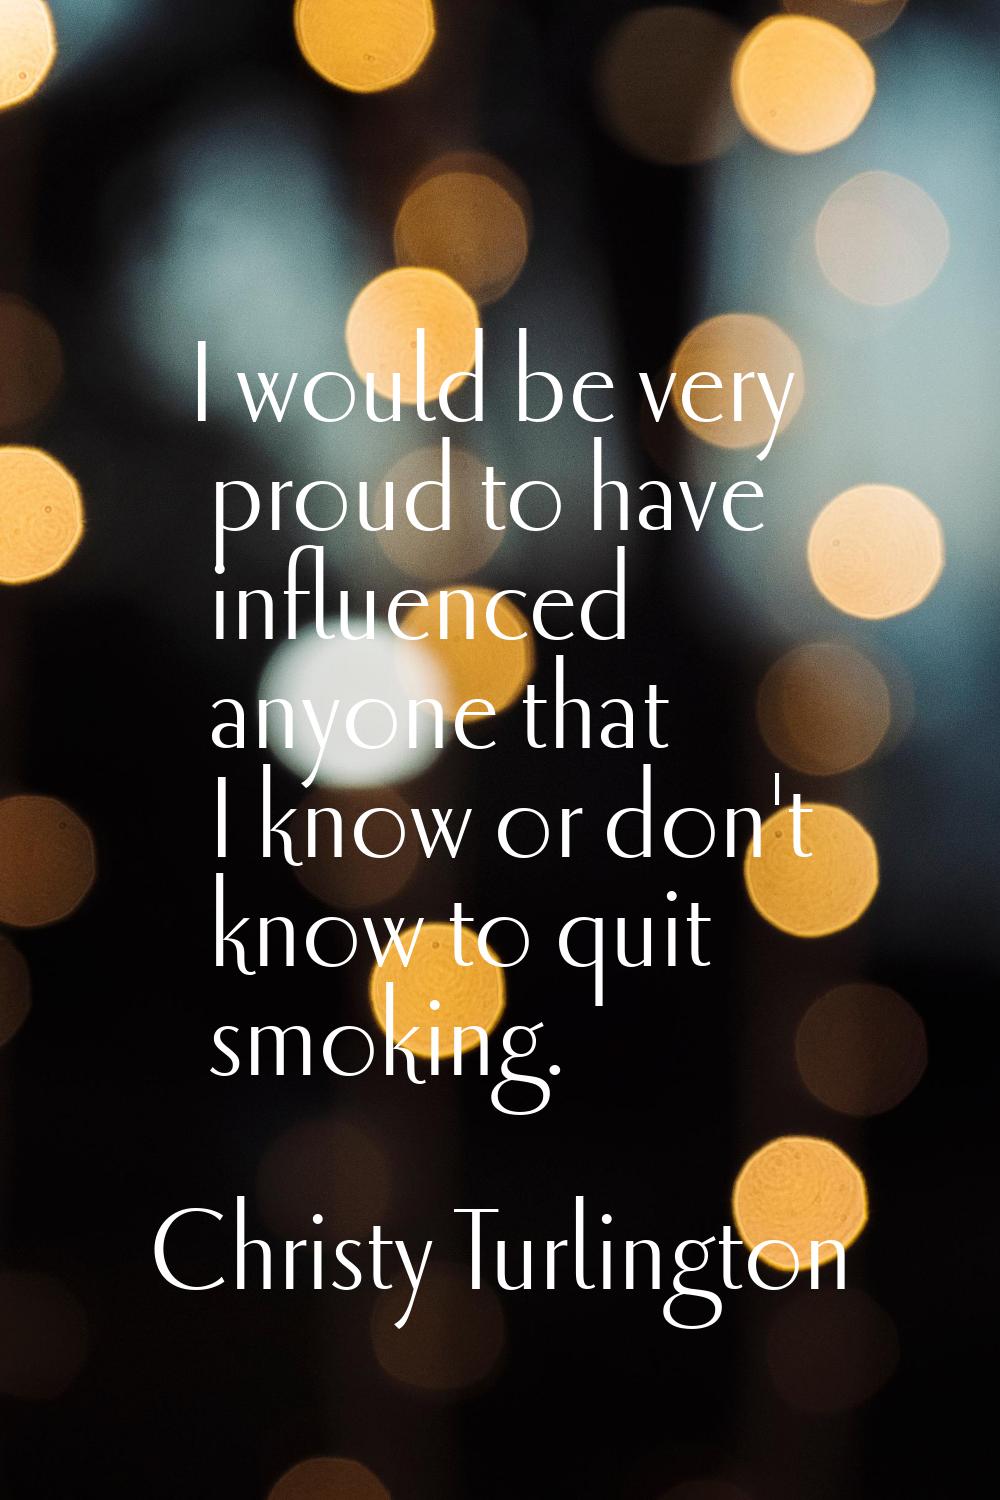 I would be very proud to have influenced anyone that I know or don't know to quit smoking.